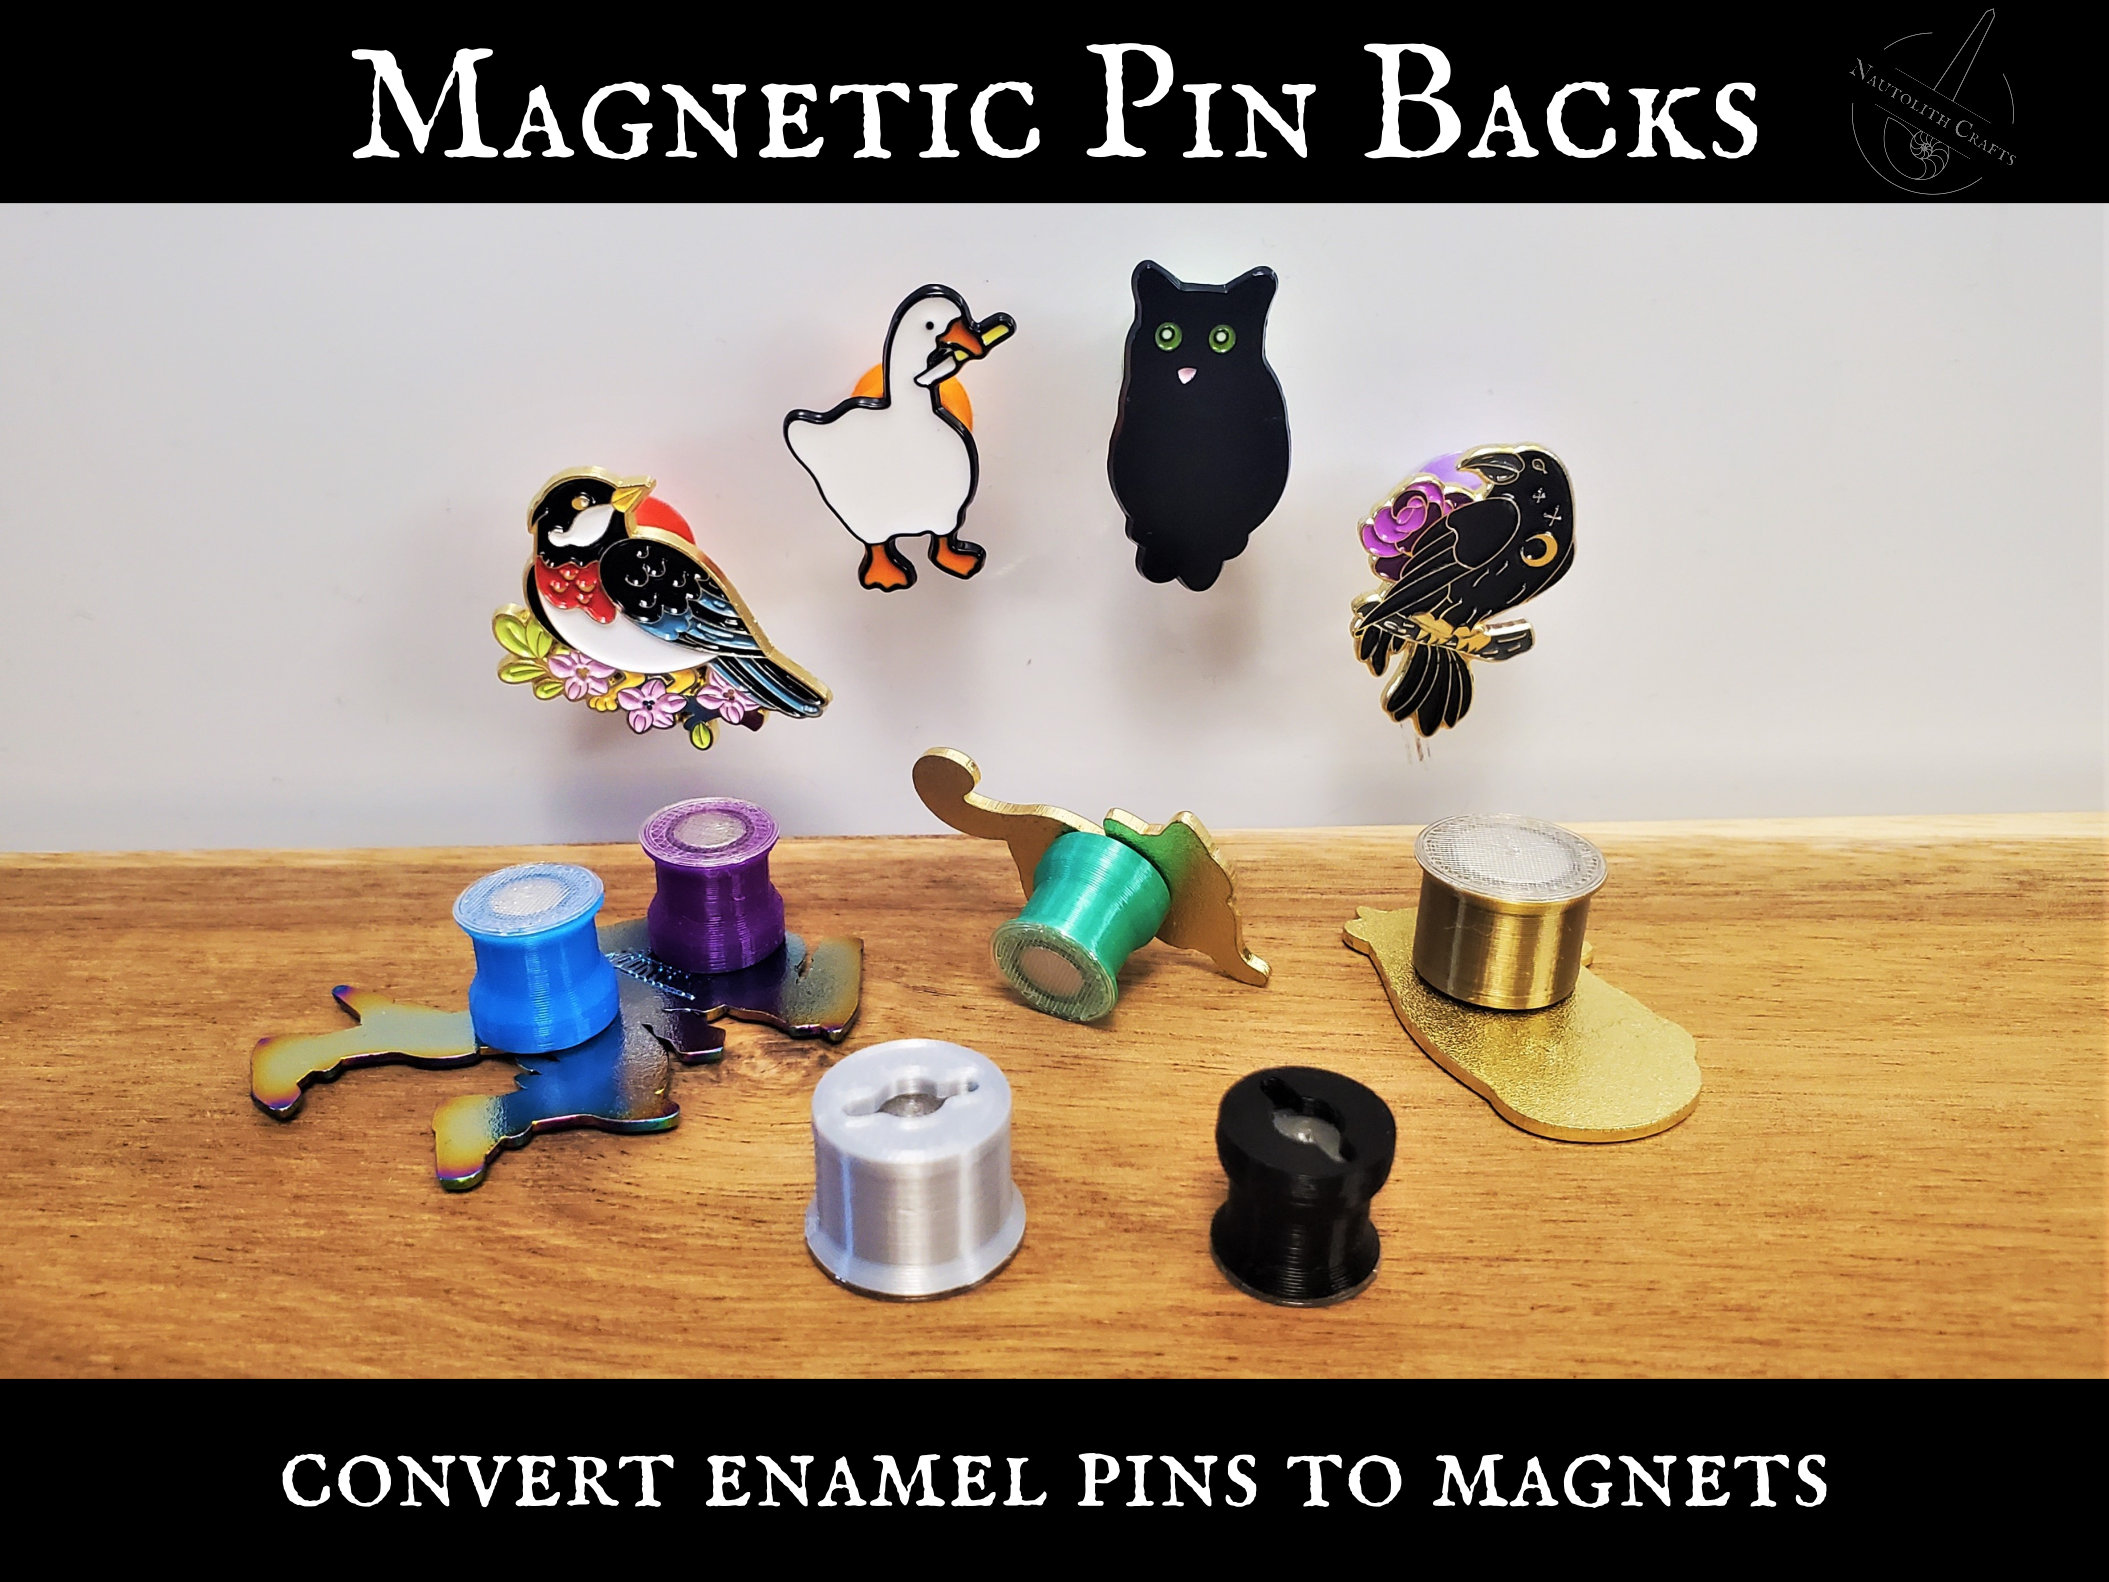 A quick video on our process of making the magnetic enamel pin backs.